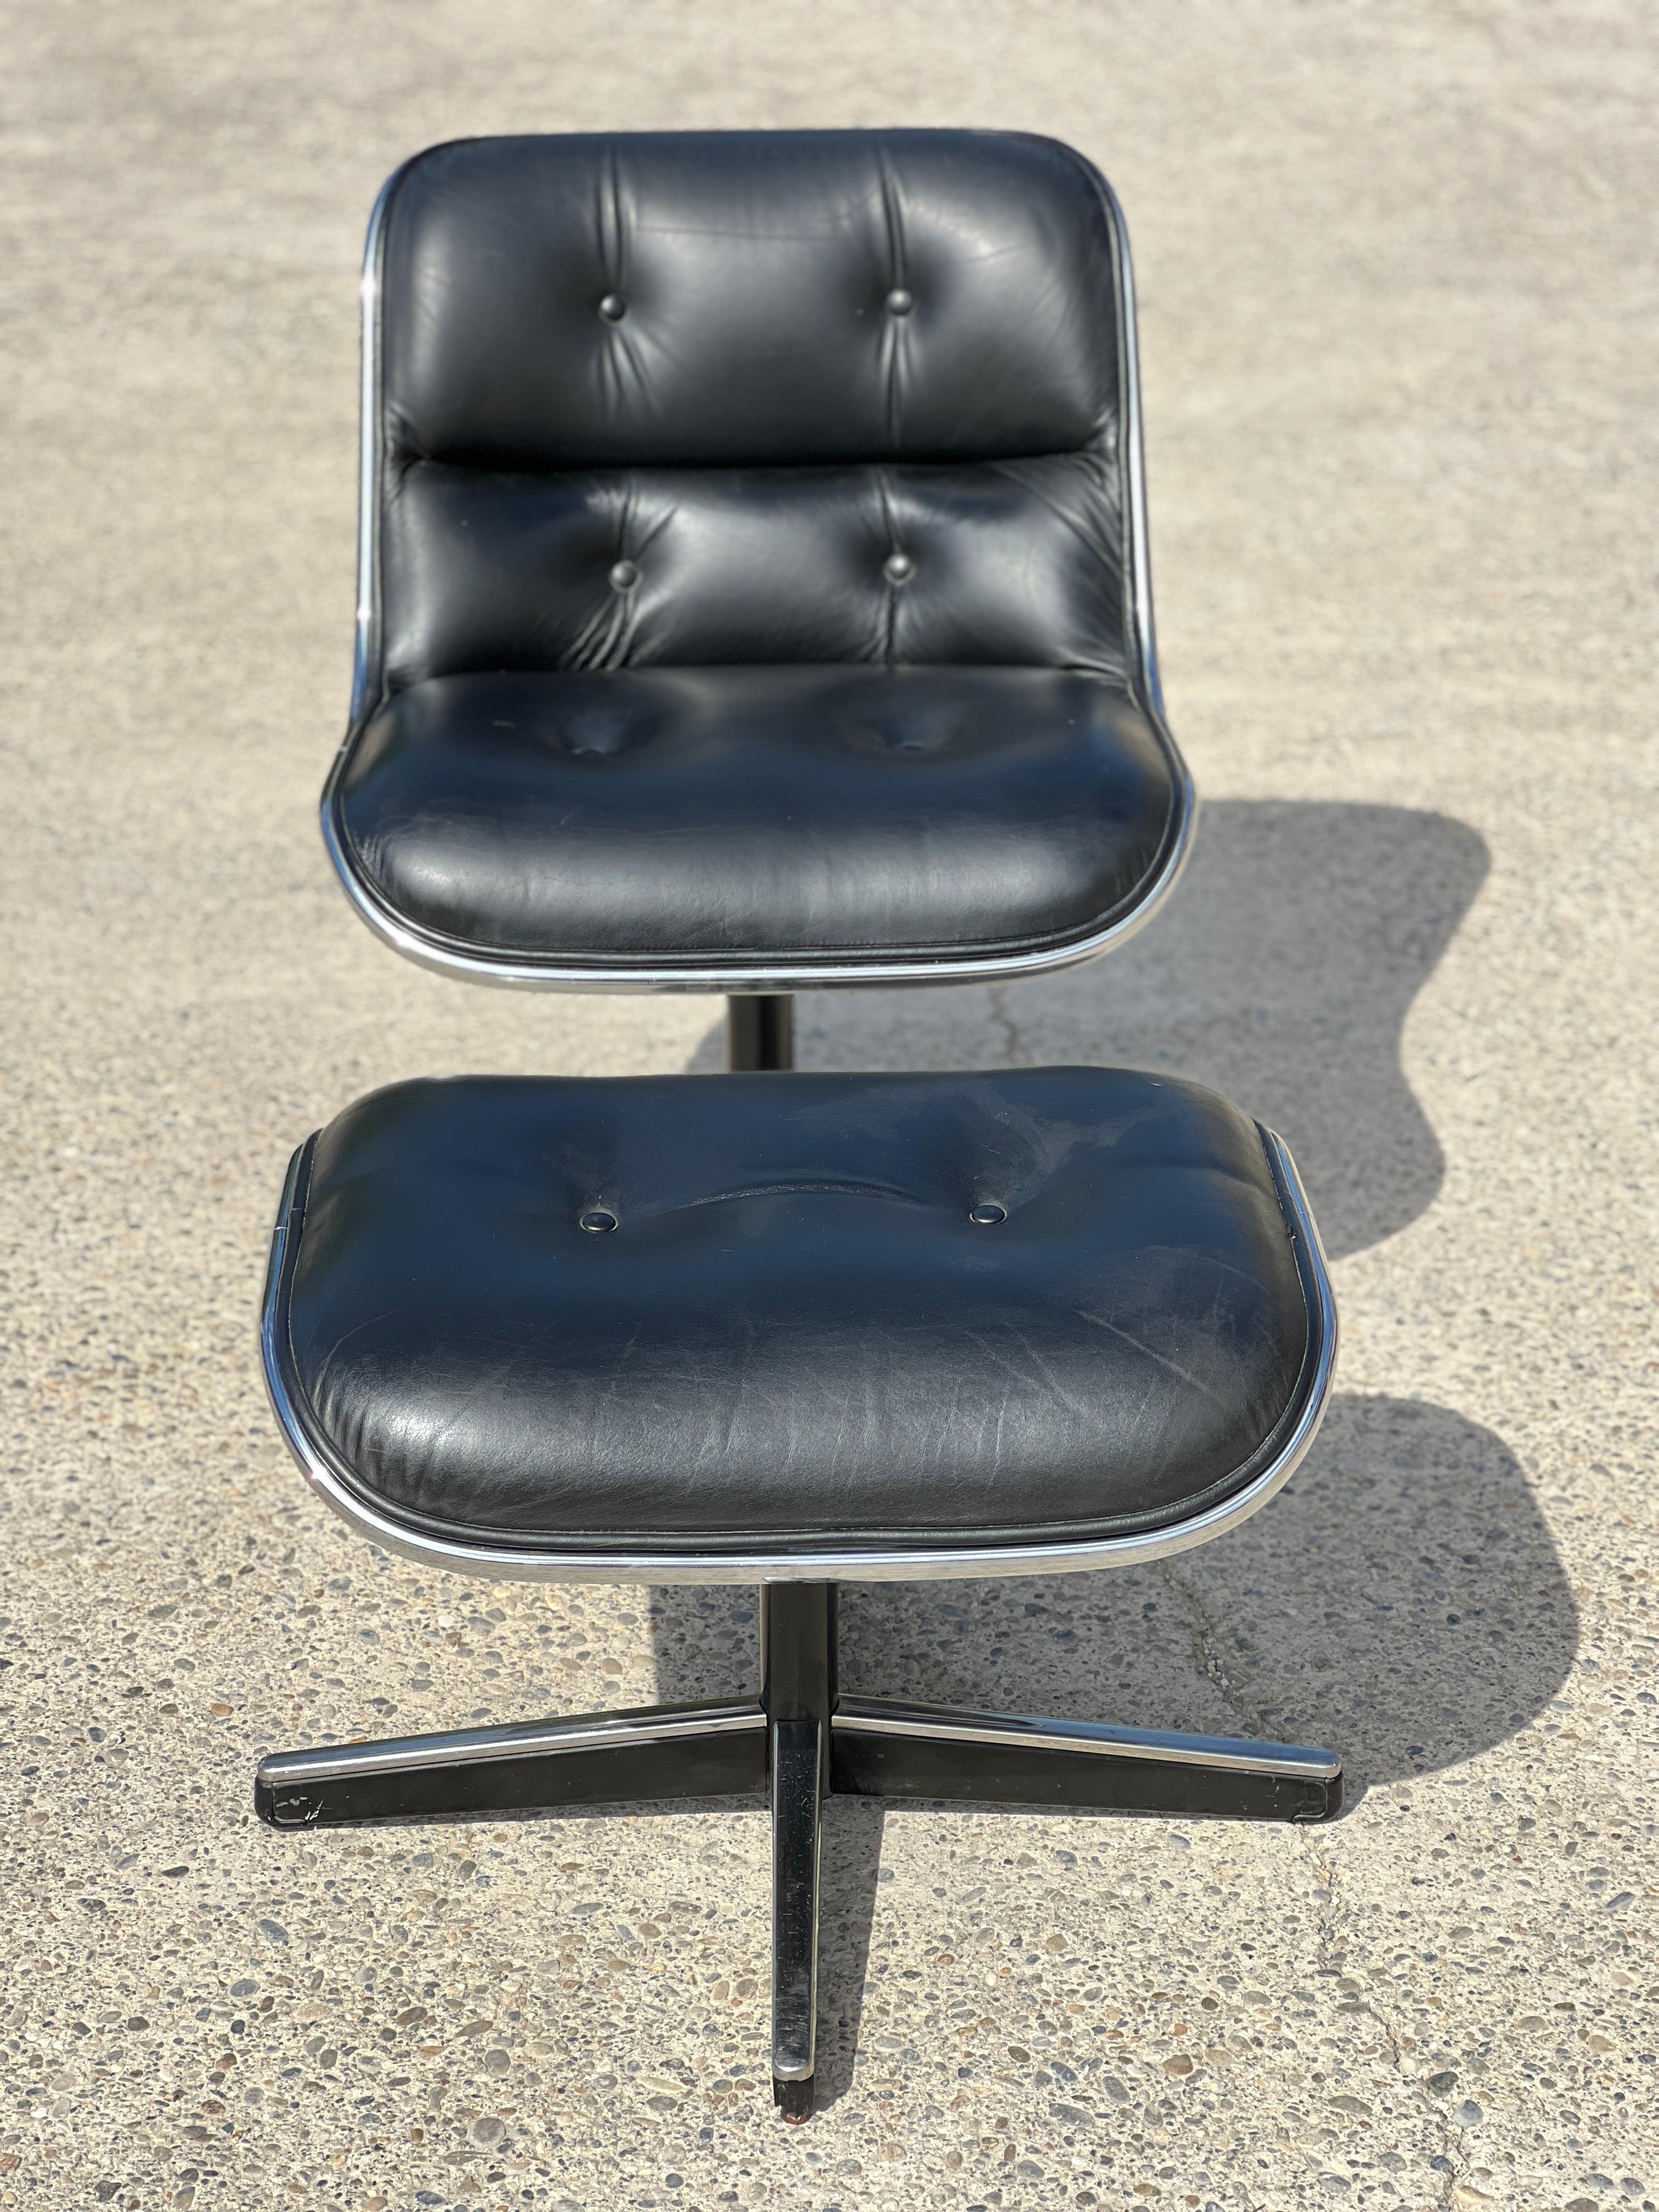 Knoll Pollock armchair with black leather ottoman Edition 1968
Aluminium star base with 5 branches.
Dimensions: W 60cm, D 70cm, Total height 84cm, Seat height 50cm.
Good condition